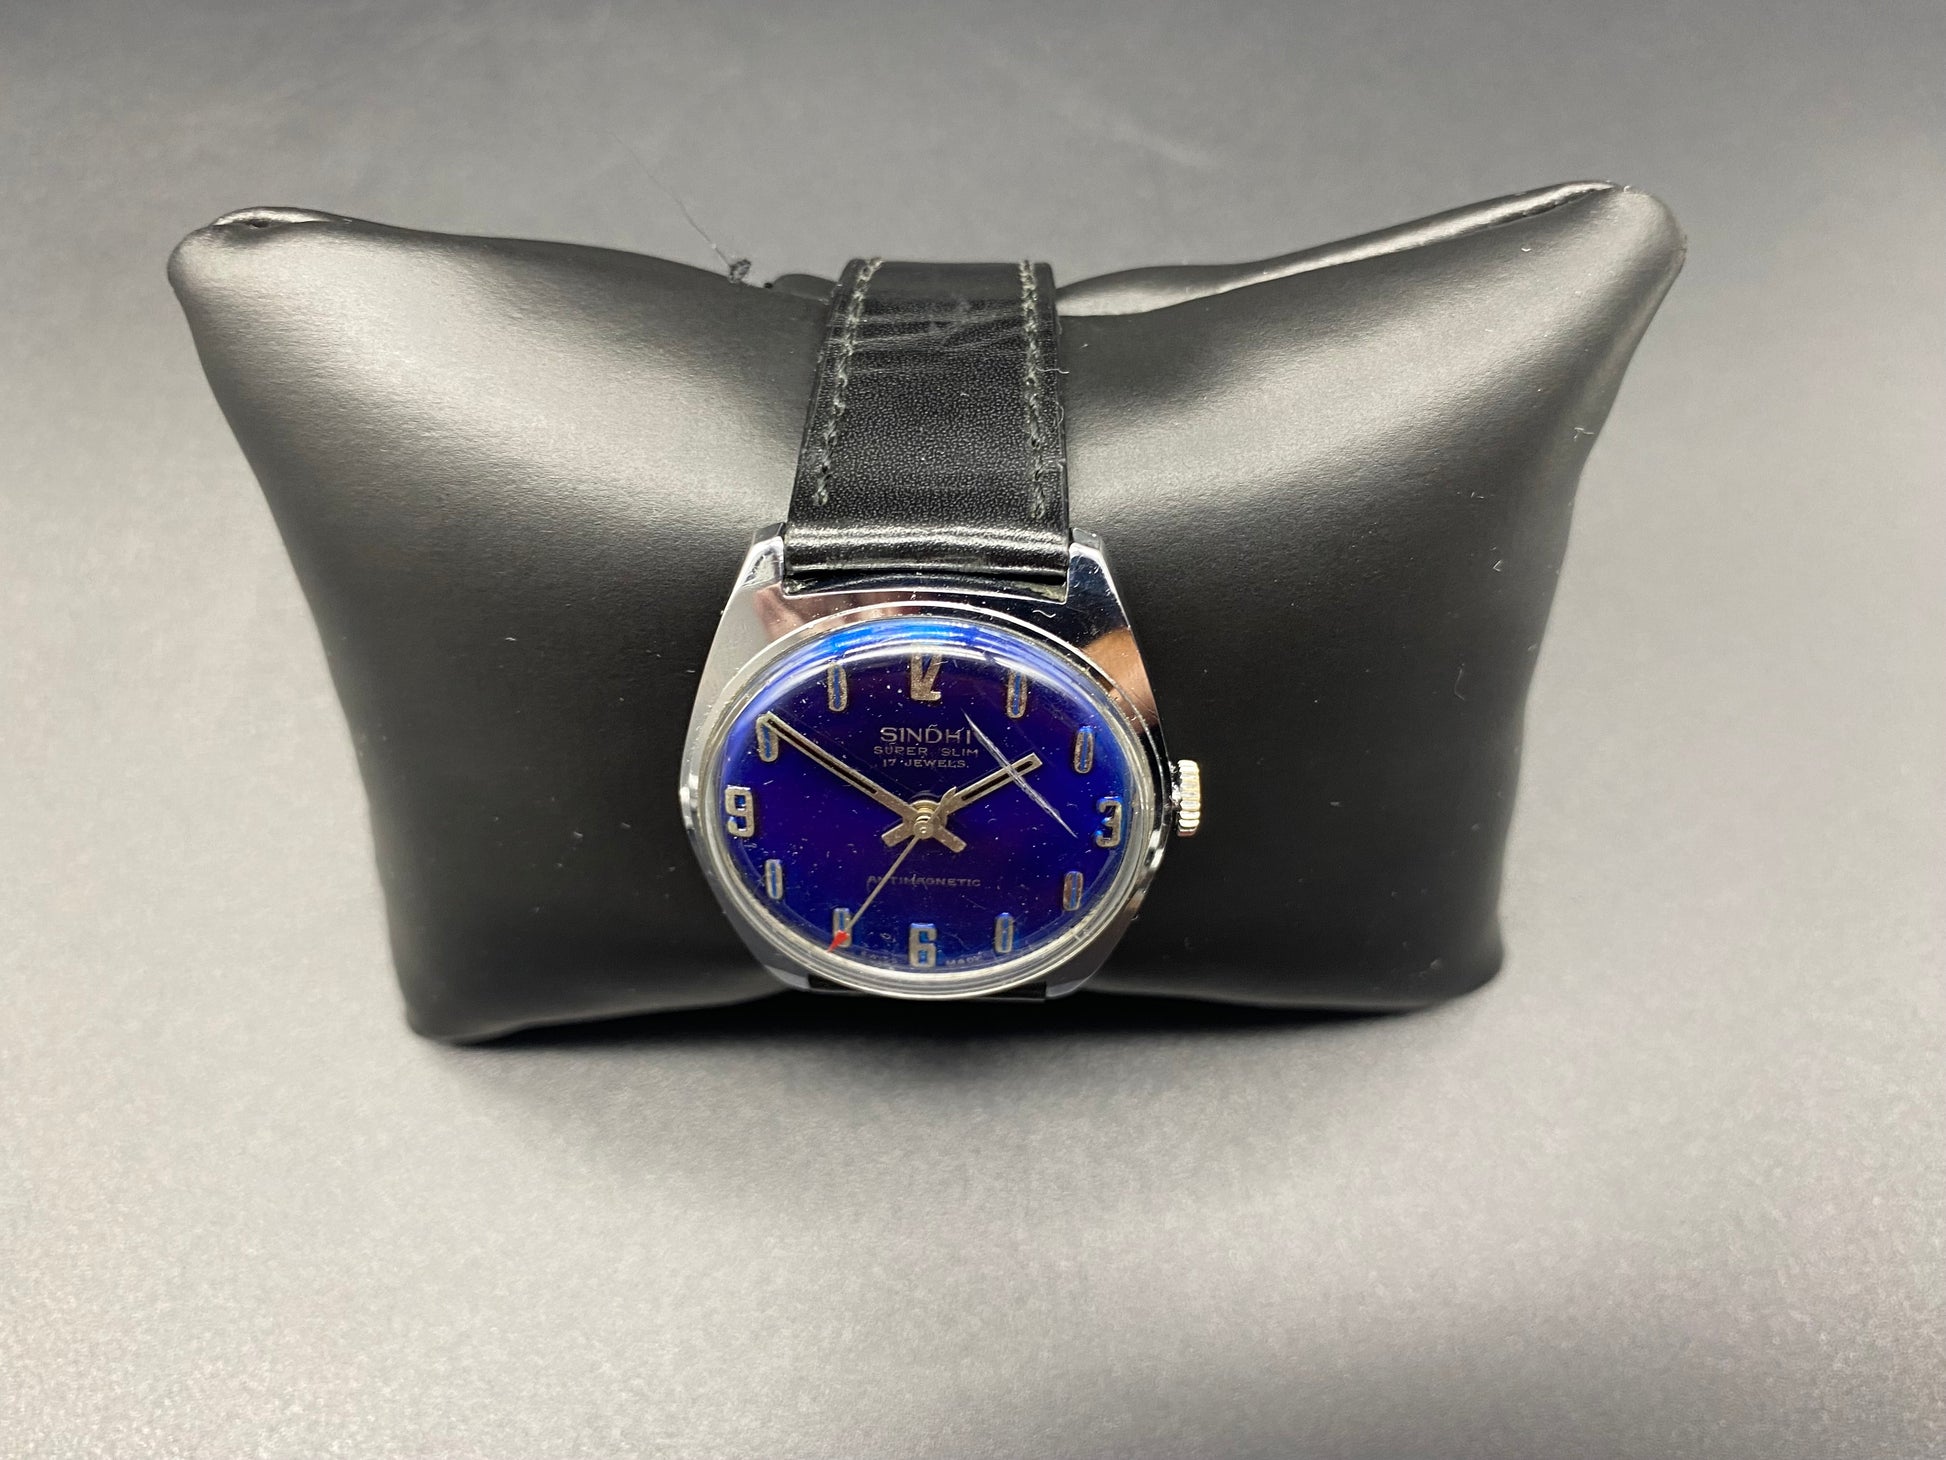 Vintage Retro SWISS MADE SINDHI Super Slim 17 Jewels Antimagnetic Watch   RARE 1970s Mens Automatic watch on Leather Strap with a Really Nice Blue Dial and Red Arrow Tipped Seconds Hand 